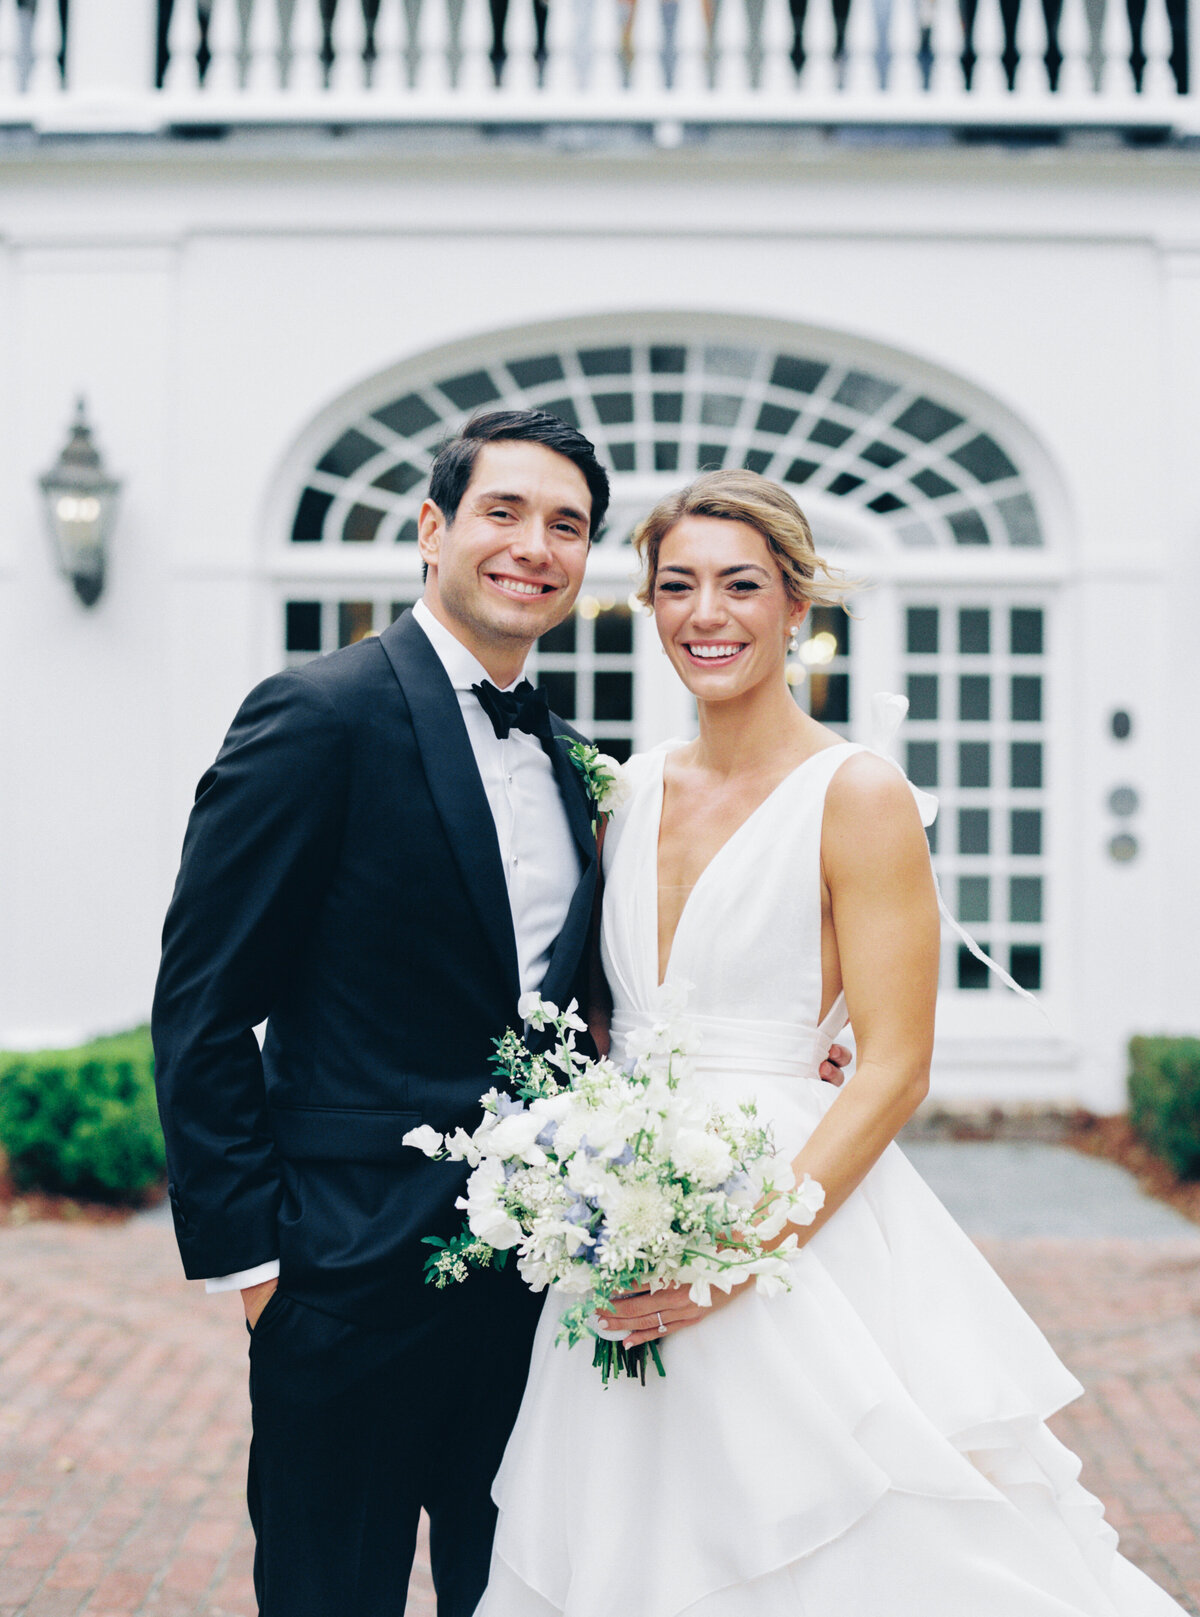 Charleston film photographer. Bride and groom wedding day portraits in front of Lowndes Grove.